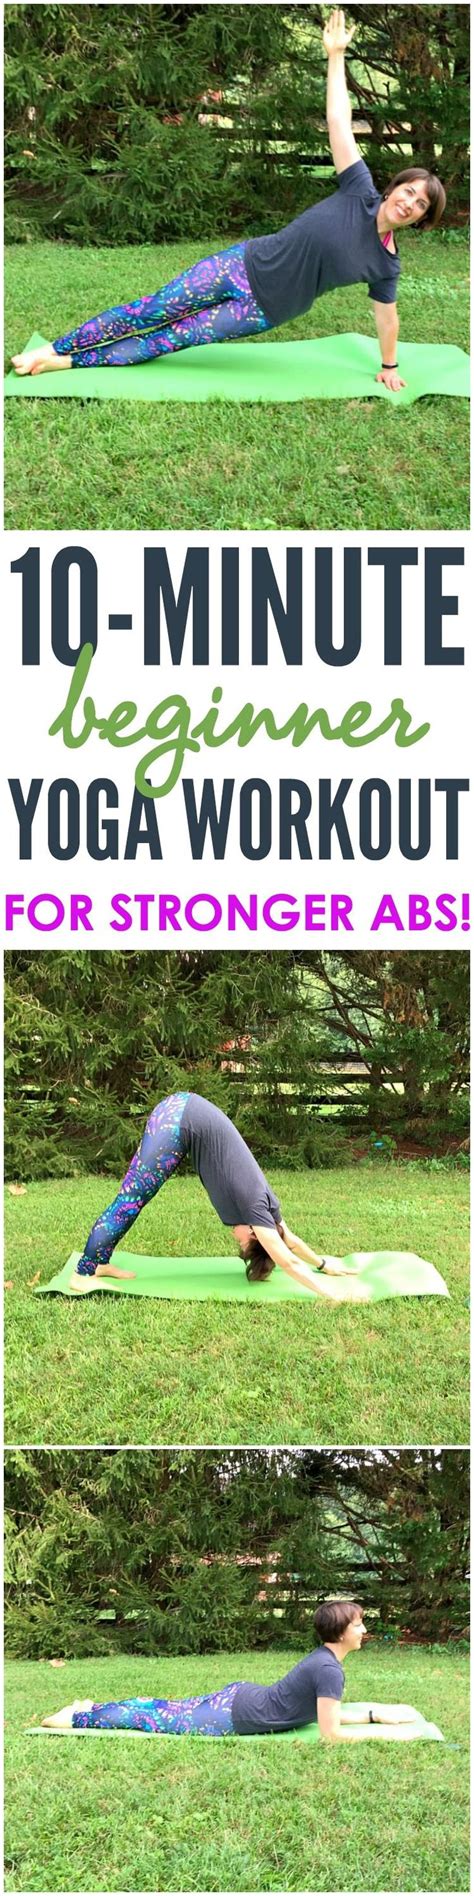 10 Minute Beginner Yoga Workout For Stronger Abs The Seasoned Mom Beginner Yoga Workout